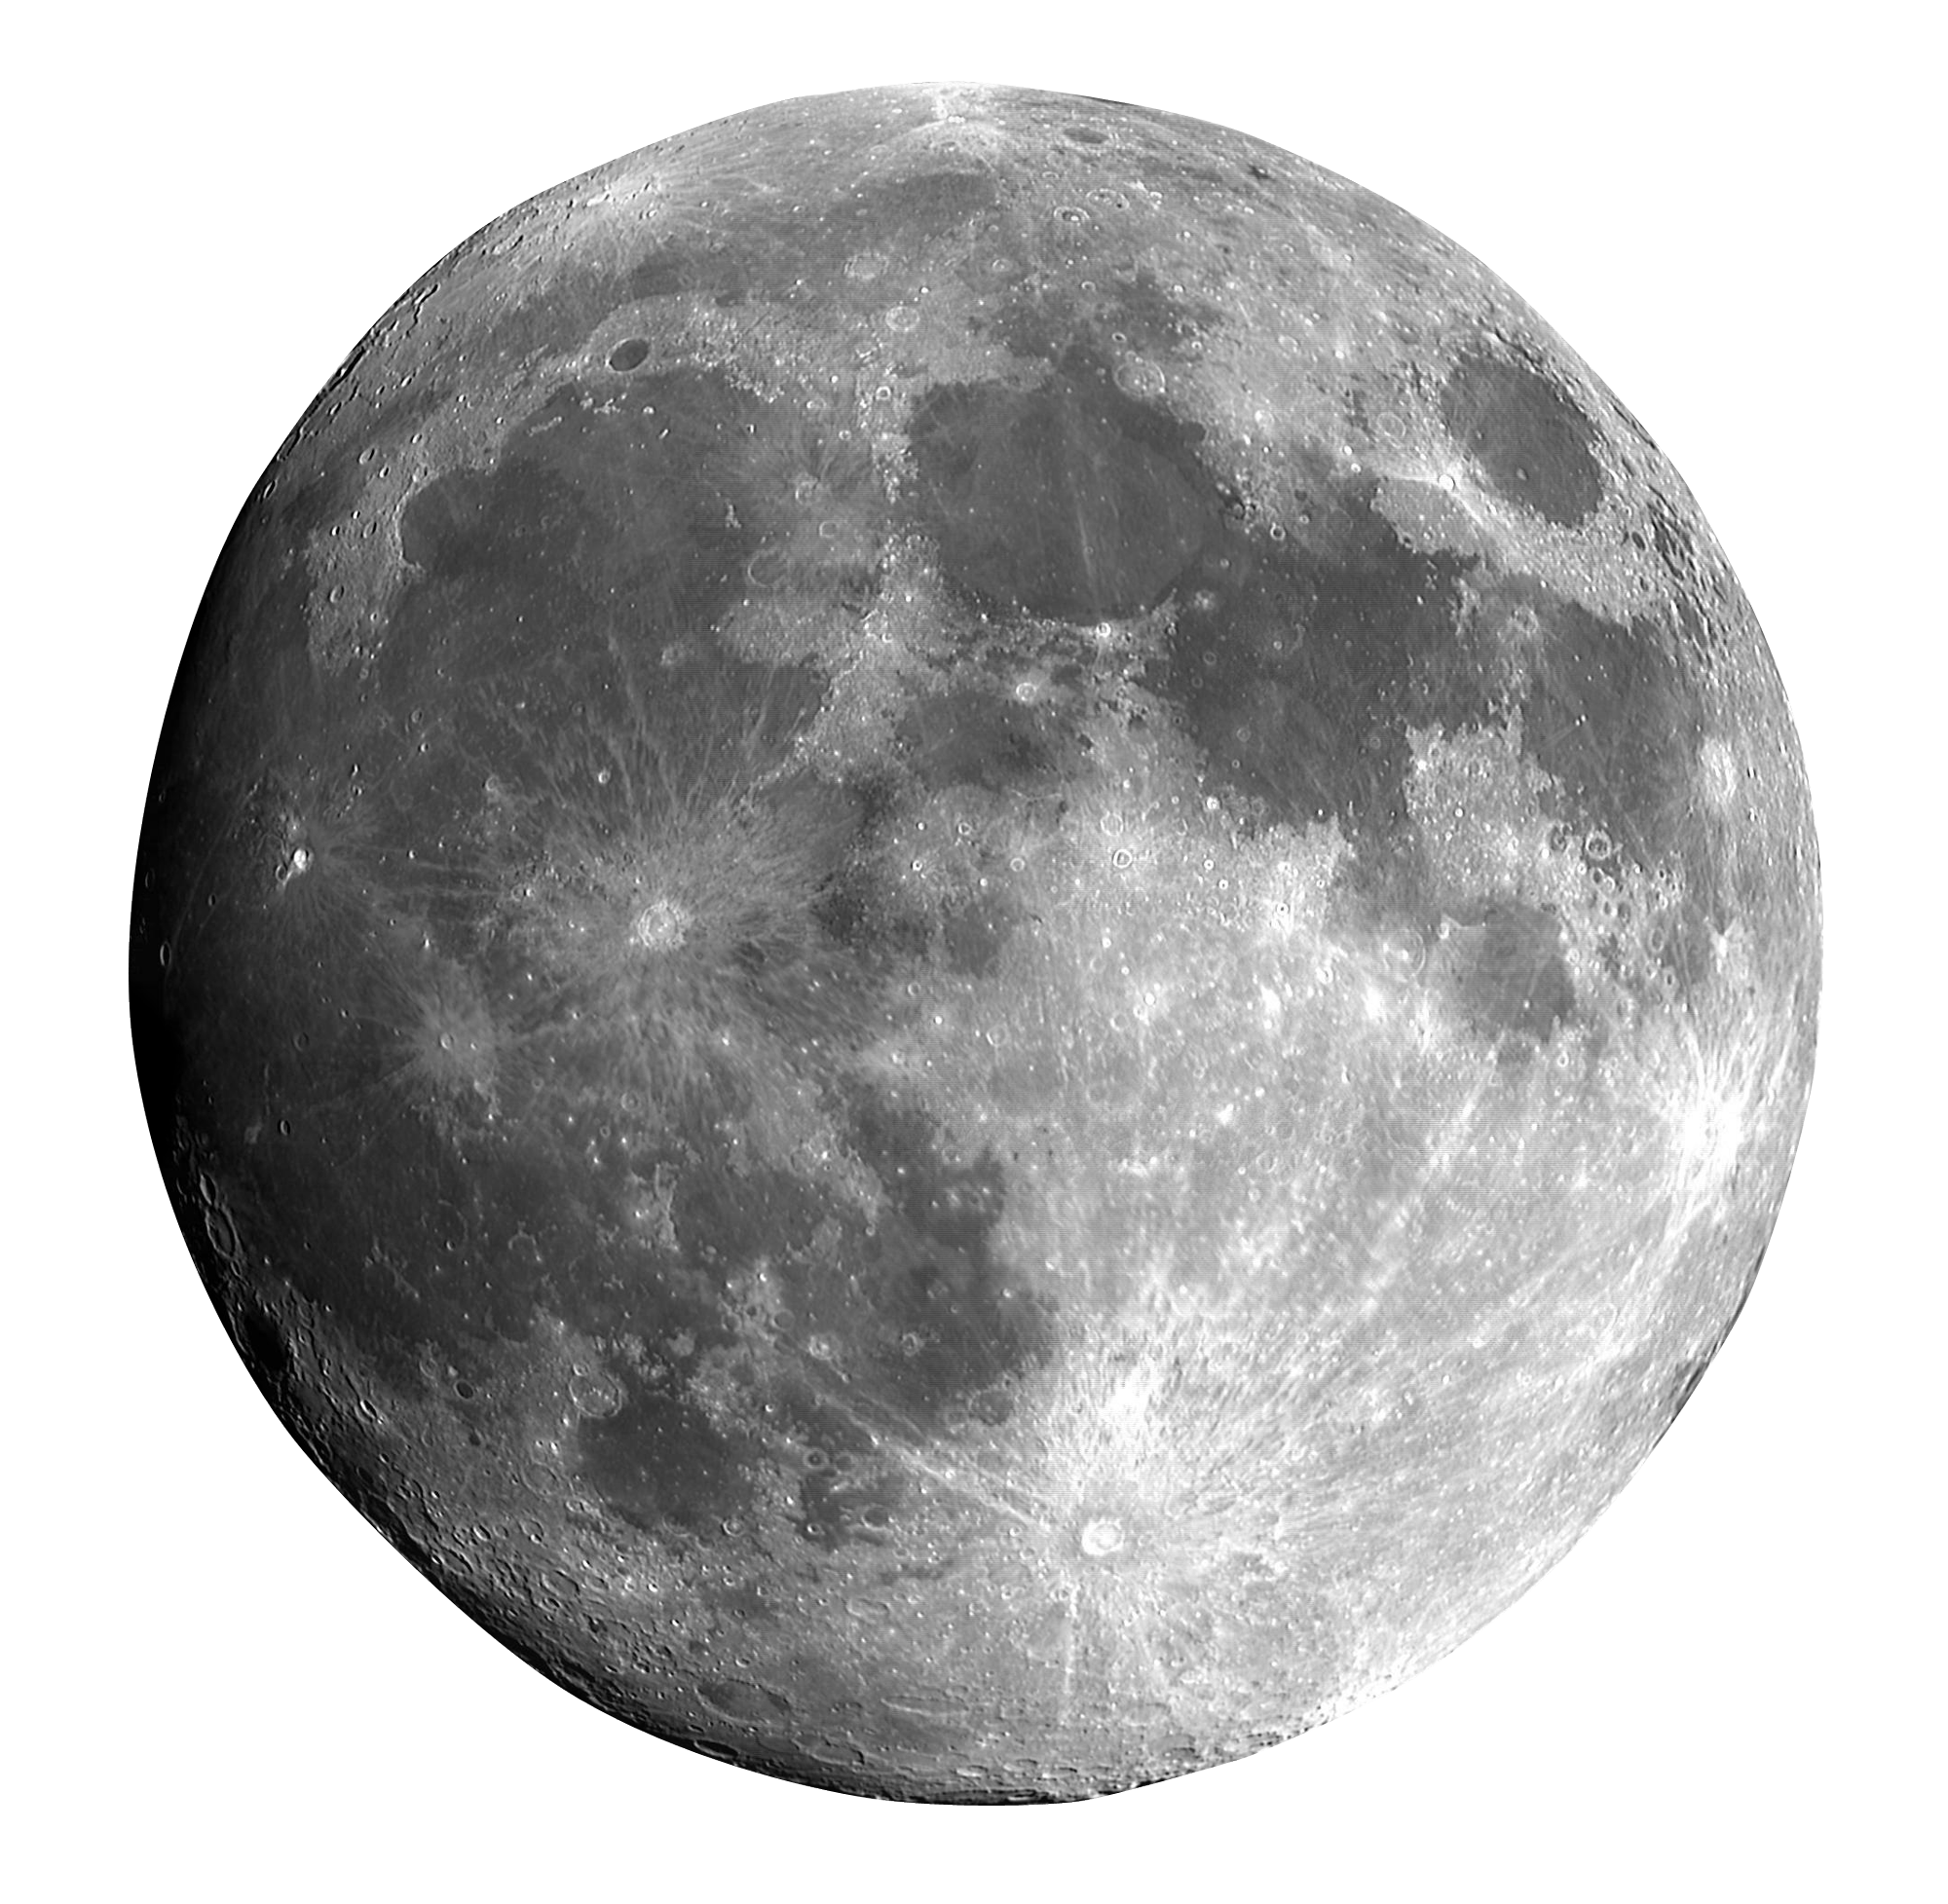 Black and white Moon PNG Image - PurePNG | Free transparent CC0 PNG